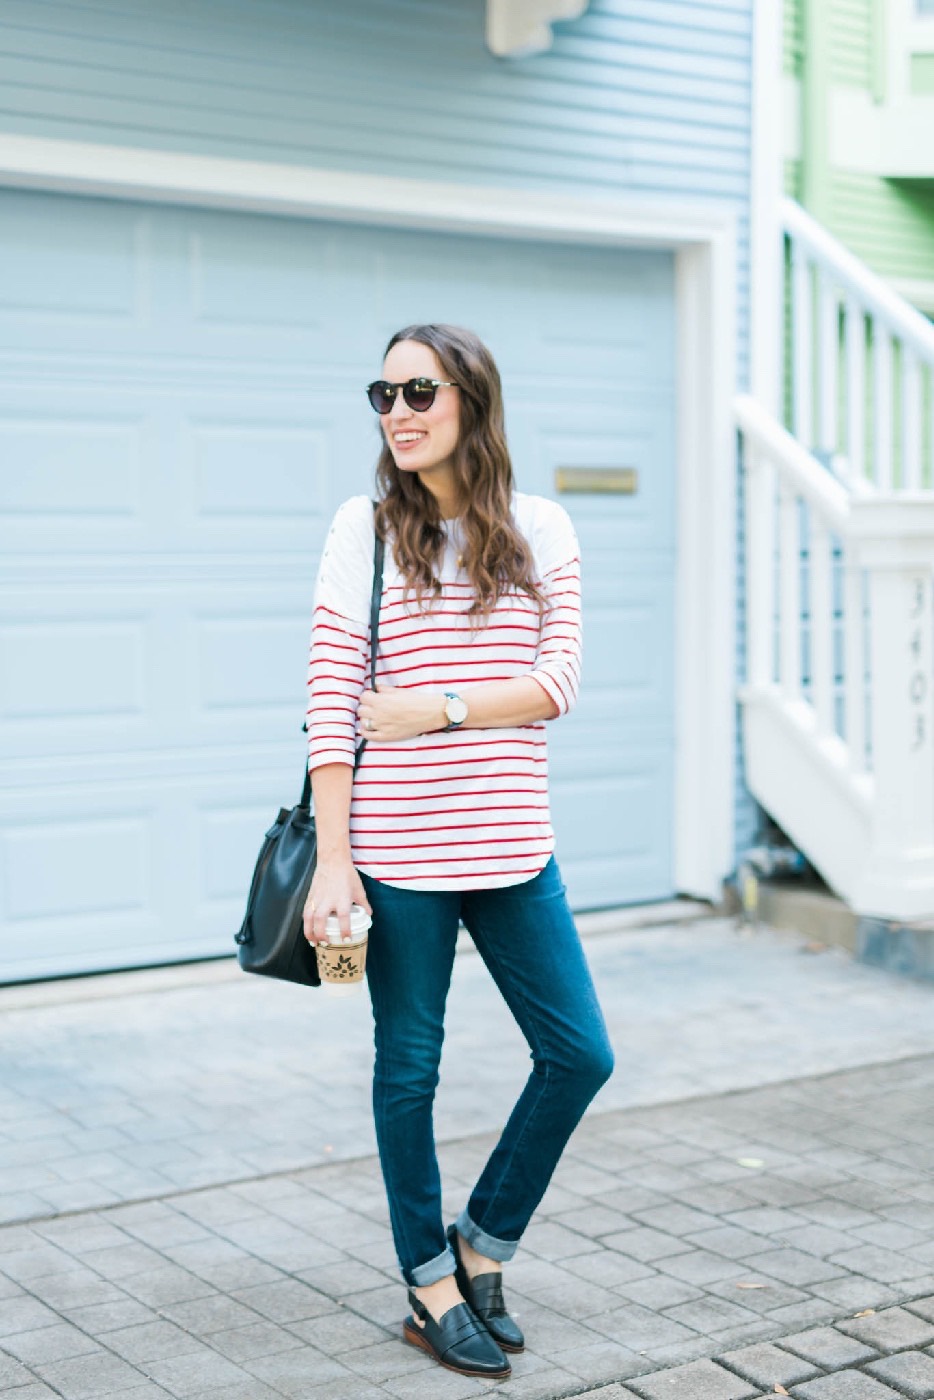 A casual maternity outfit in a striped breton maternity top from Seraphine Maternity with Citizens of Humanity jeans.